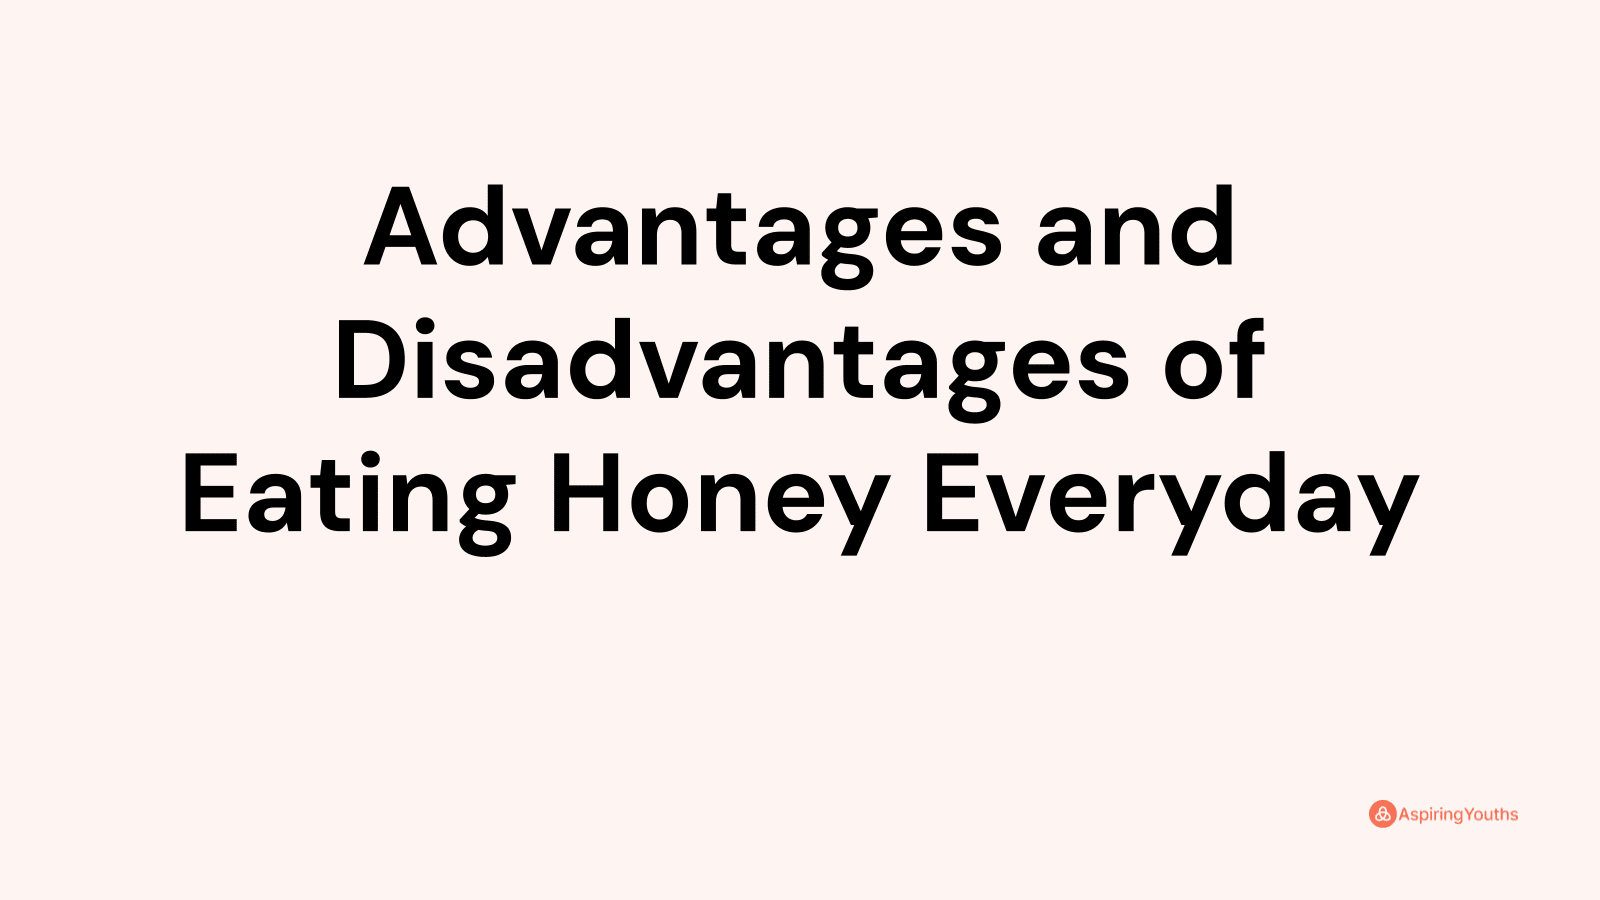 Advantages and disadvantages of Eating Honey Everyday